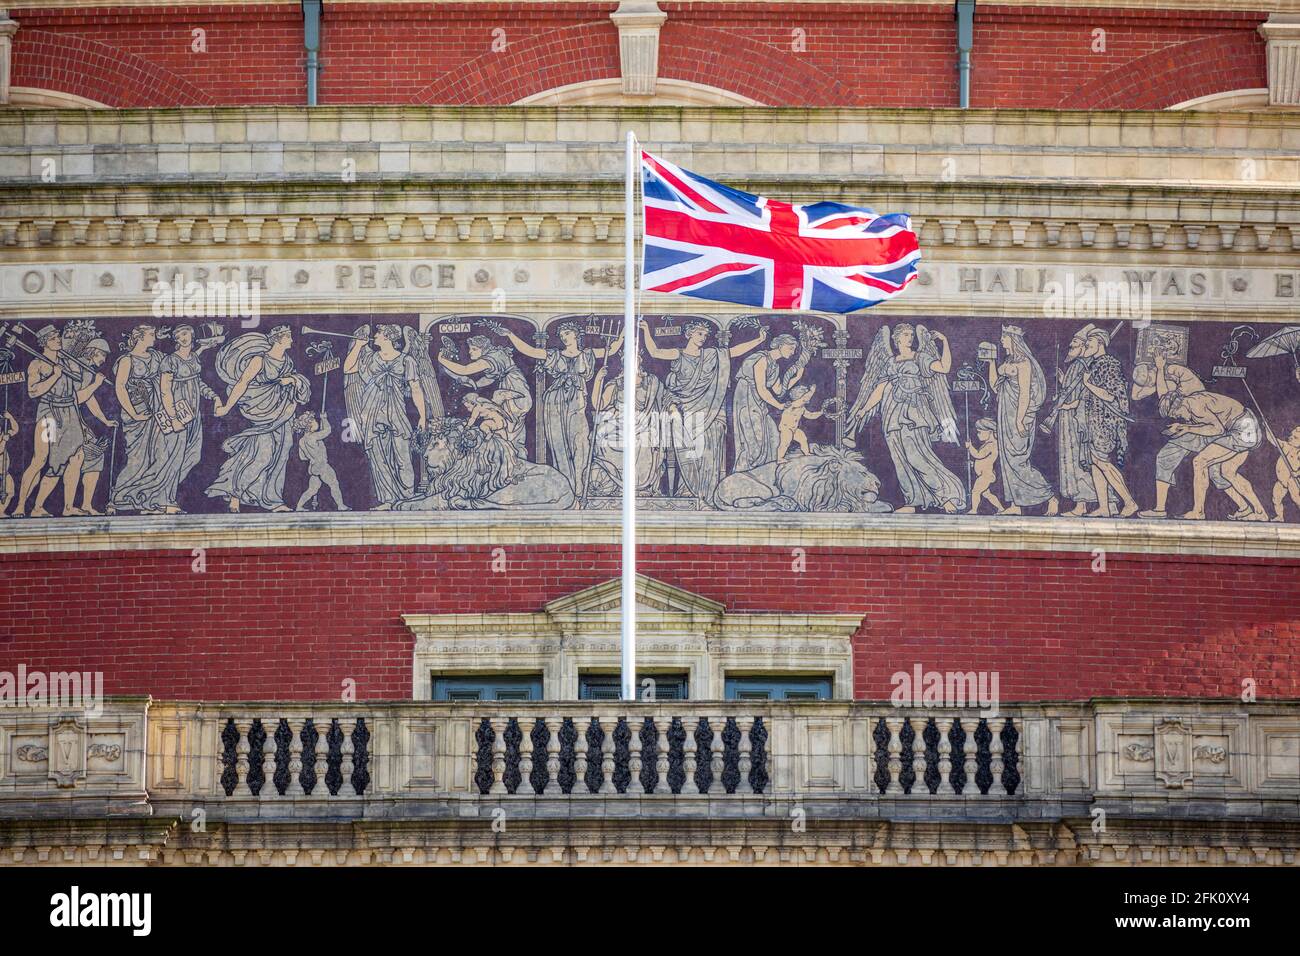 Union Jack flag flying on exterior of the Royal Albert Hall viewed from the Albert Memorial, Kensington, London, United Kingdom, Europe Stock Photo